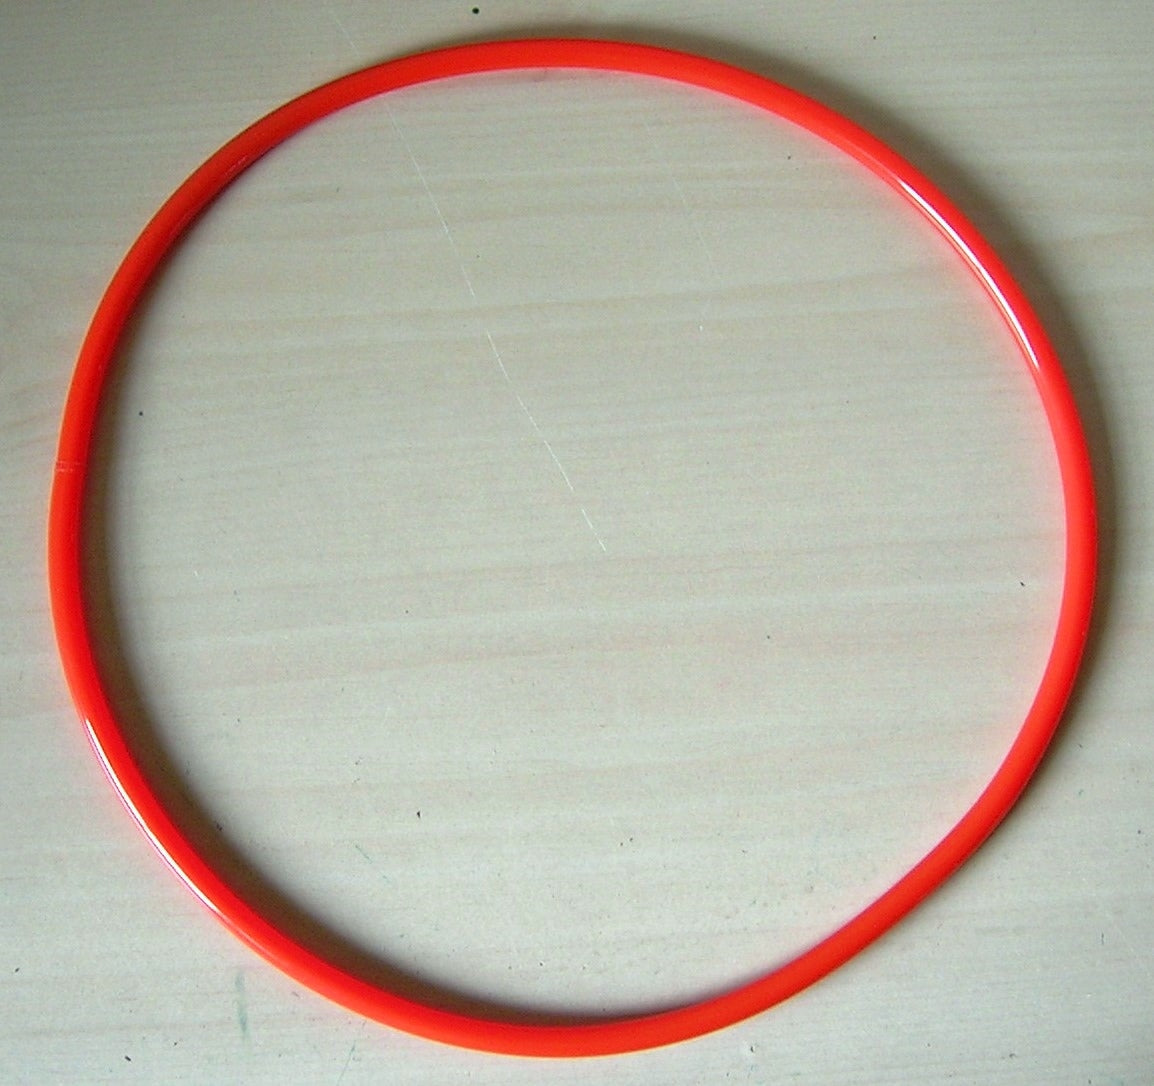 Replacement Round Drive BELT for 135-1200 ENCO 1351200 Band Saw